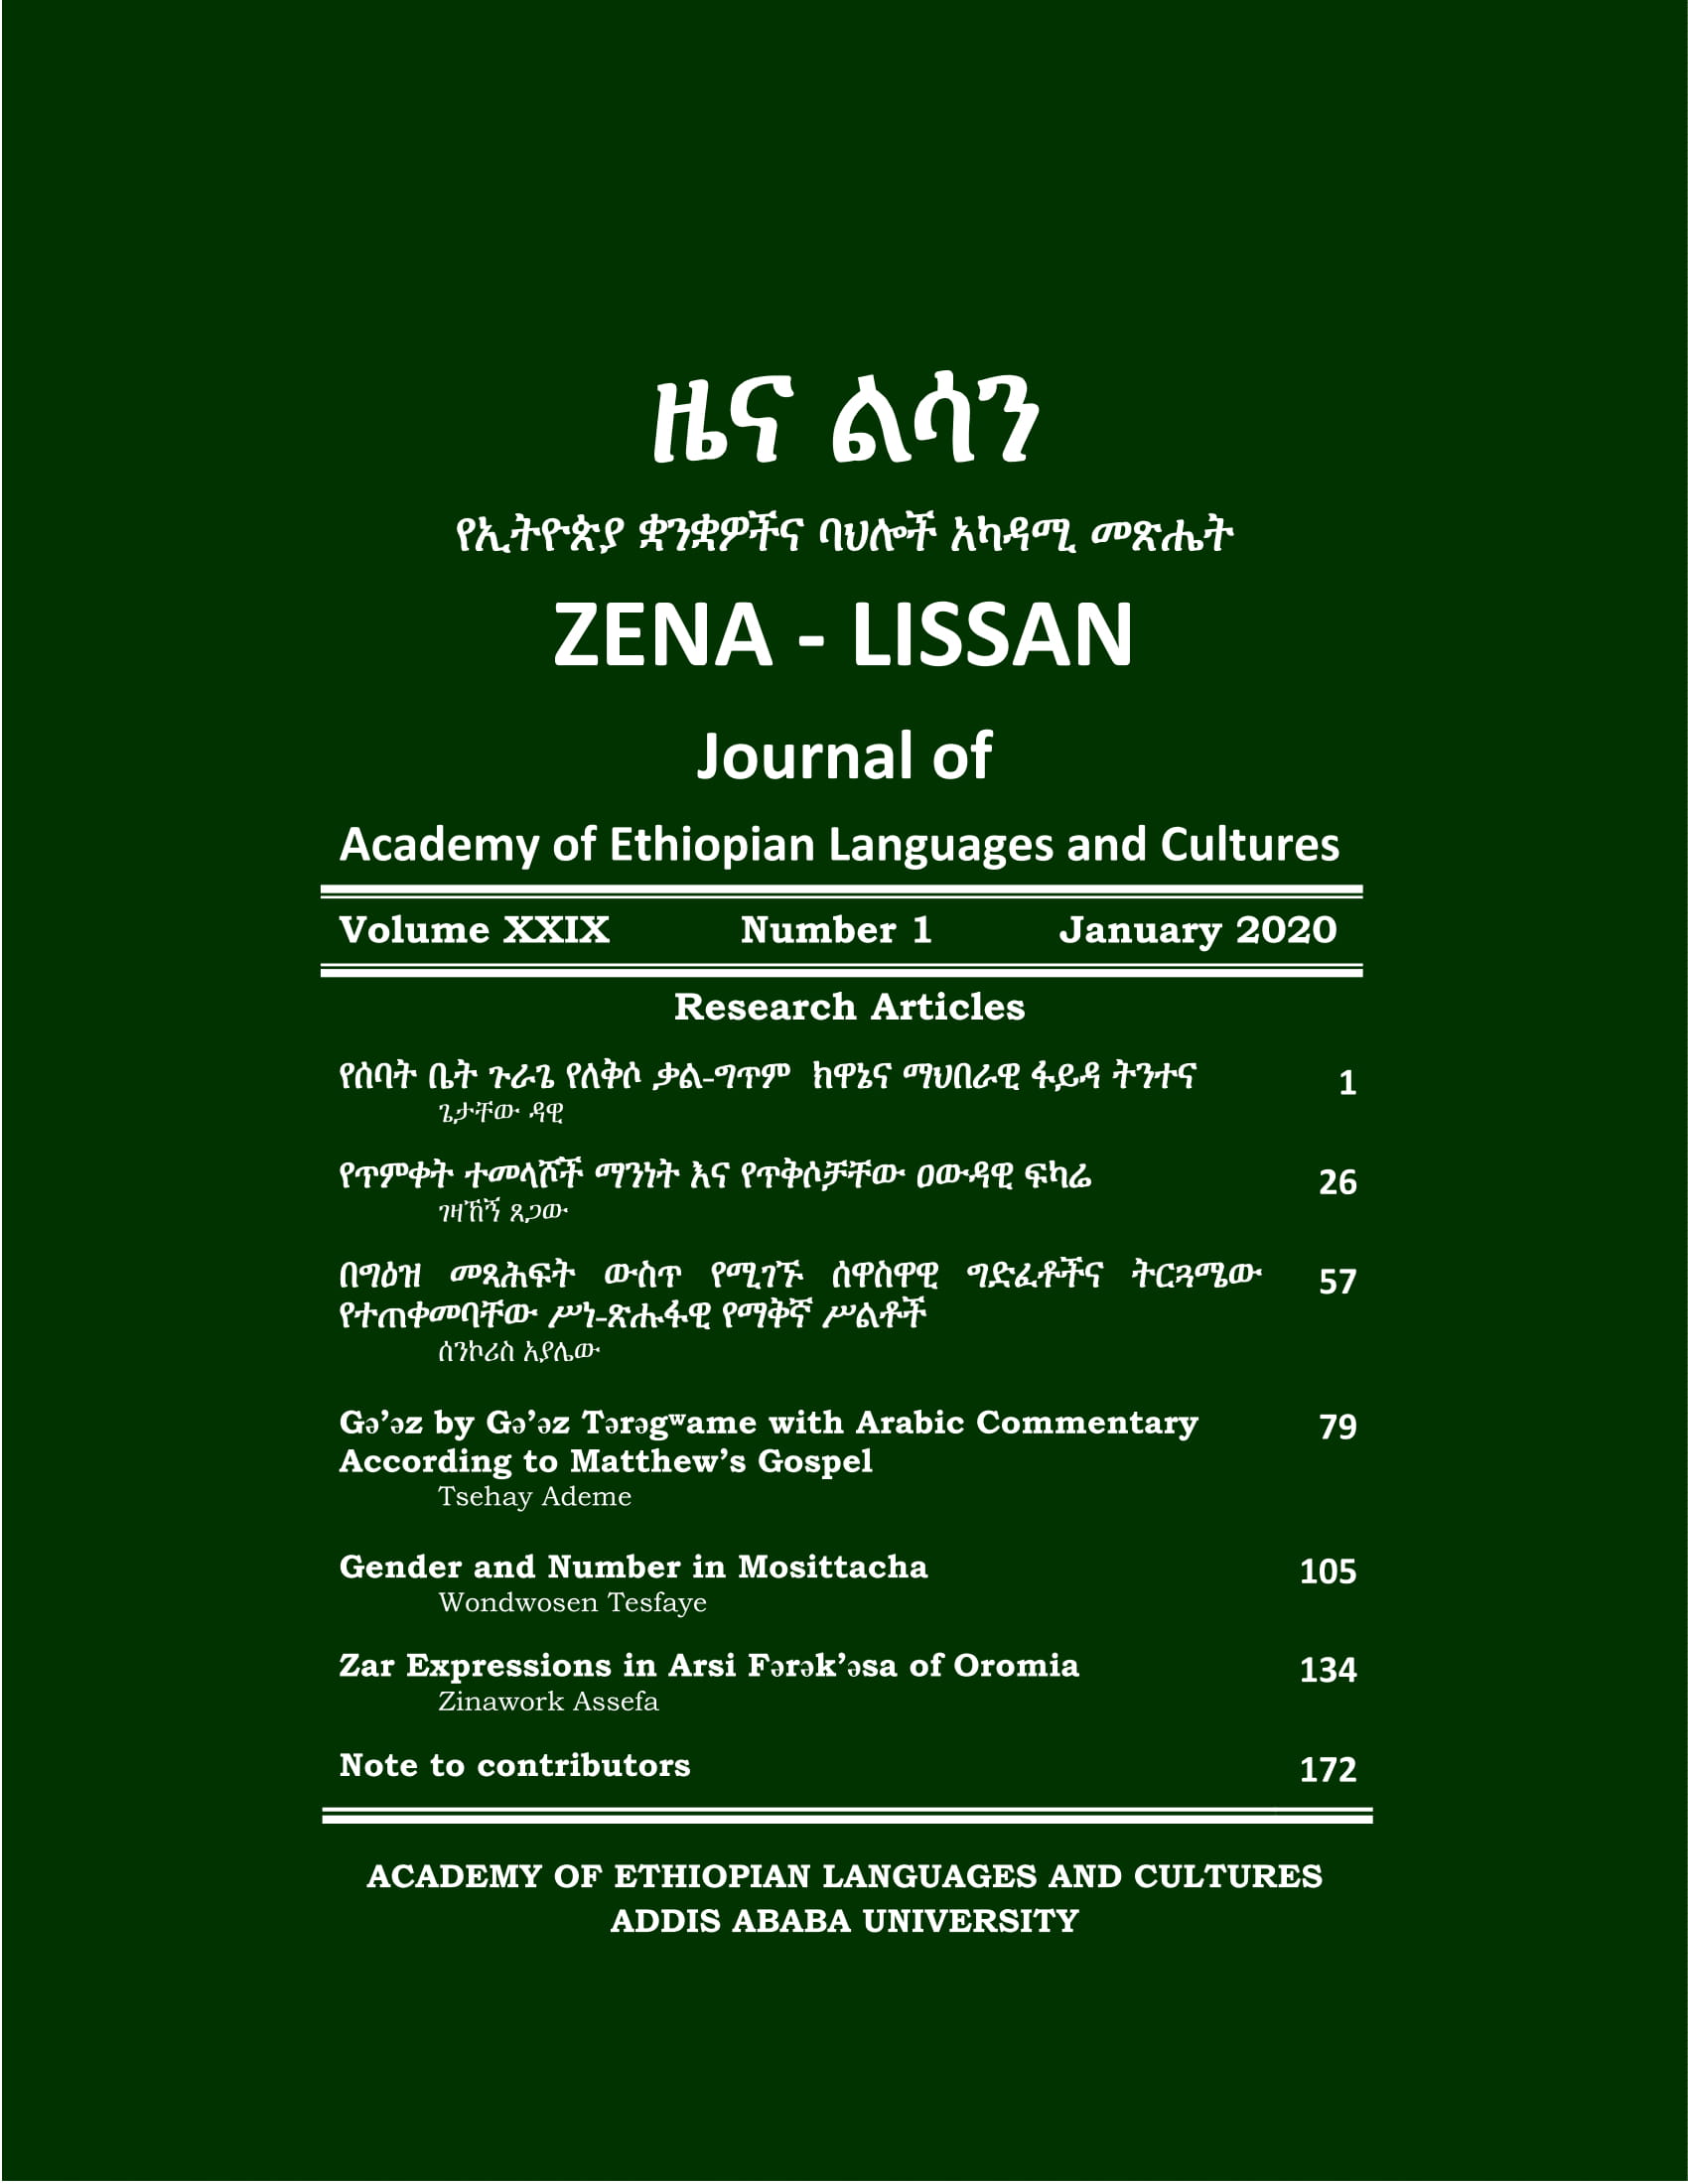 					View Vol. 29 No. 1 (2020): ZENA-LISSAN Journal of Ethiopian Languages and Cultures
				